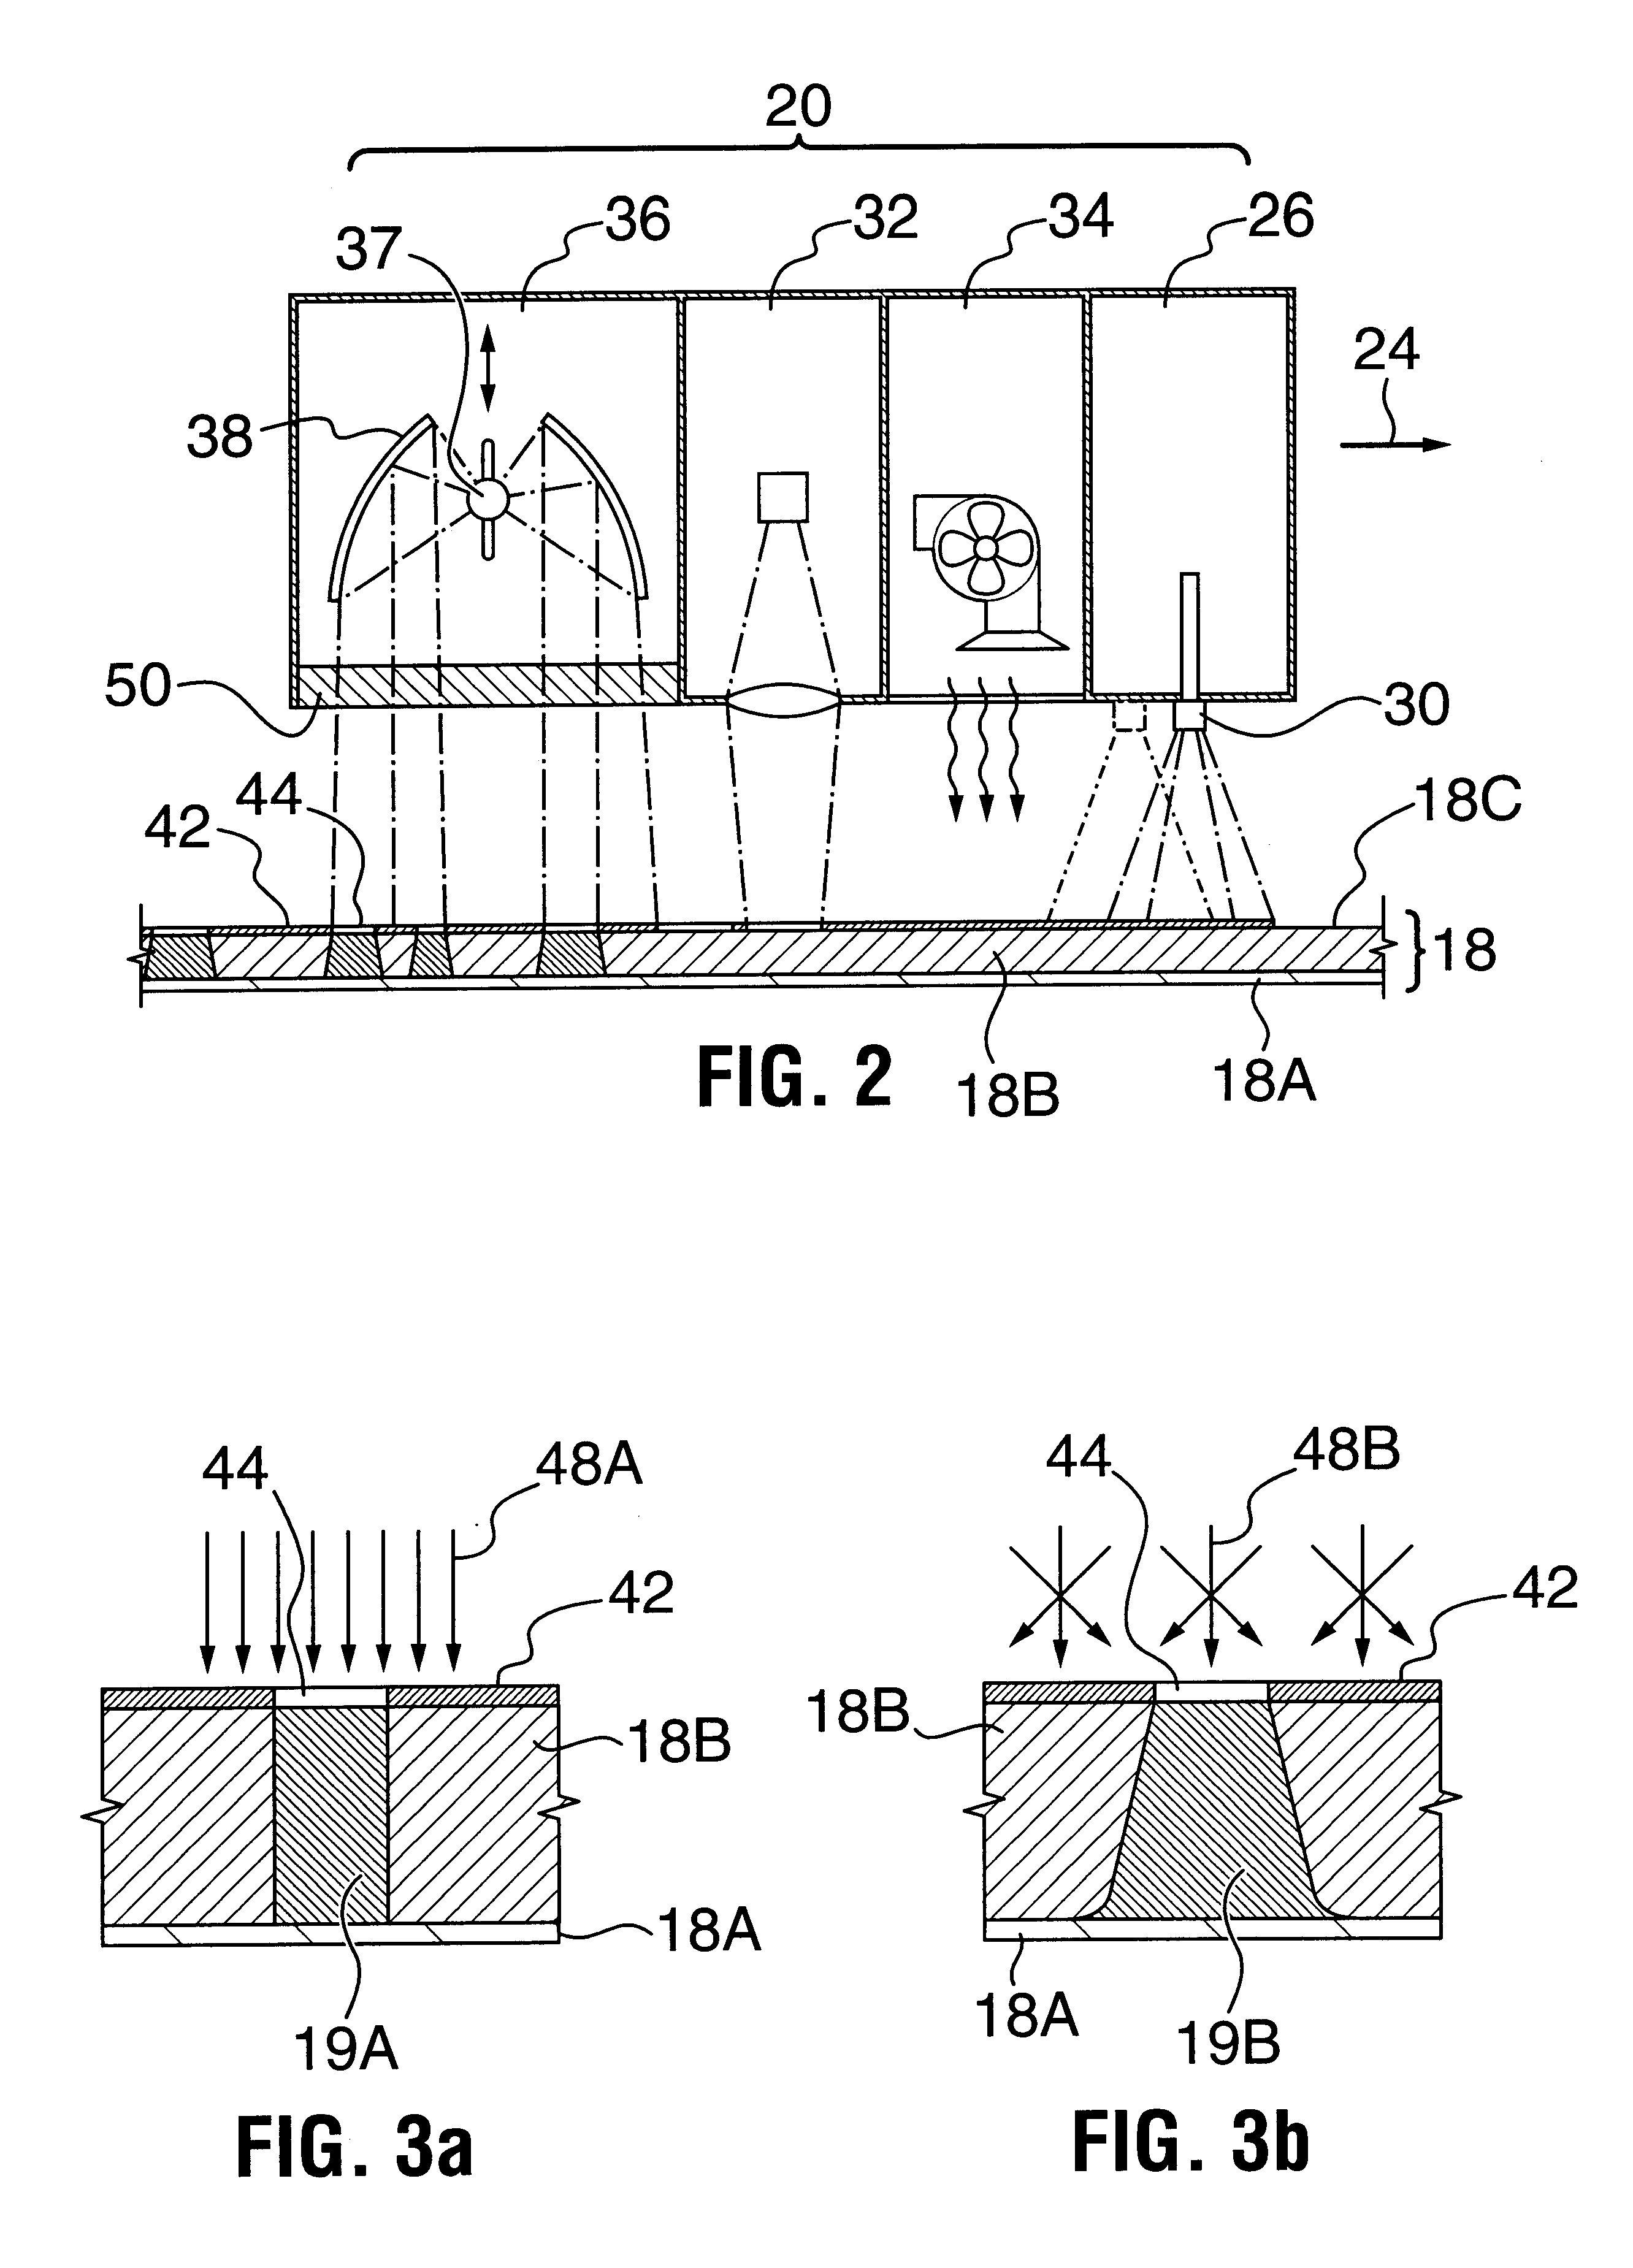 Method for masking and exposing photosensitive printing plates